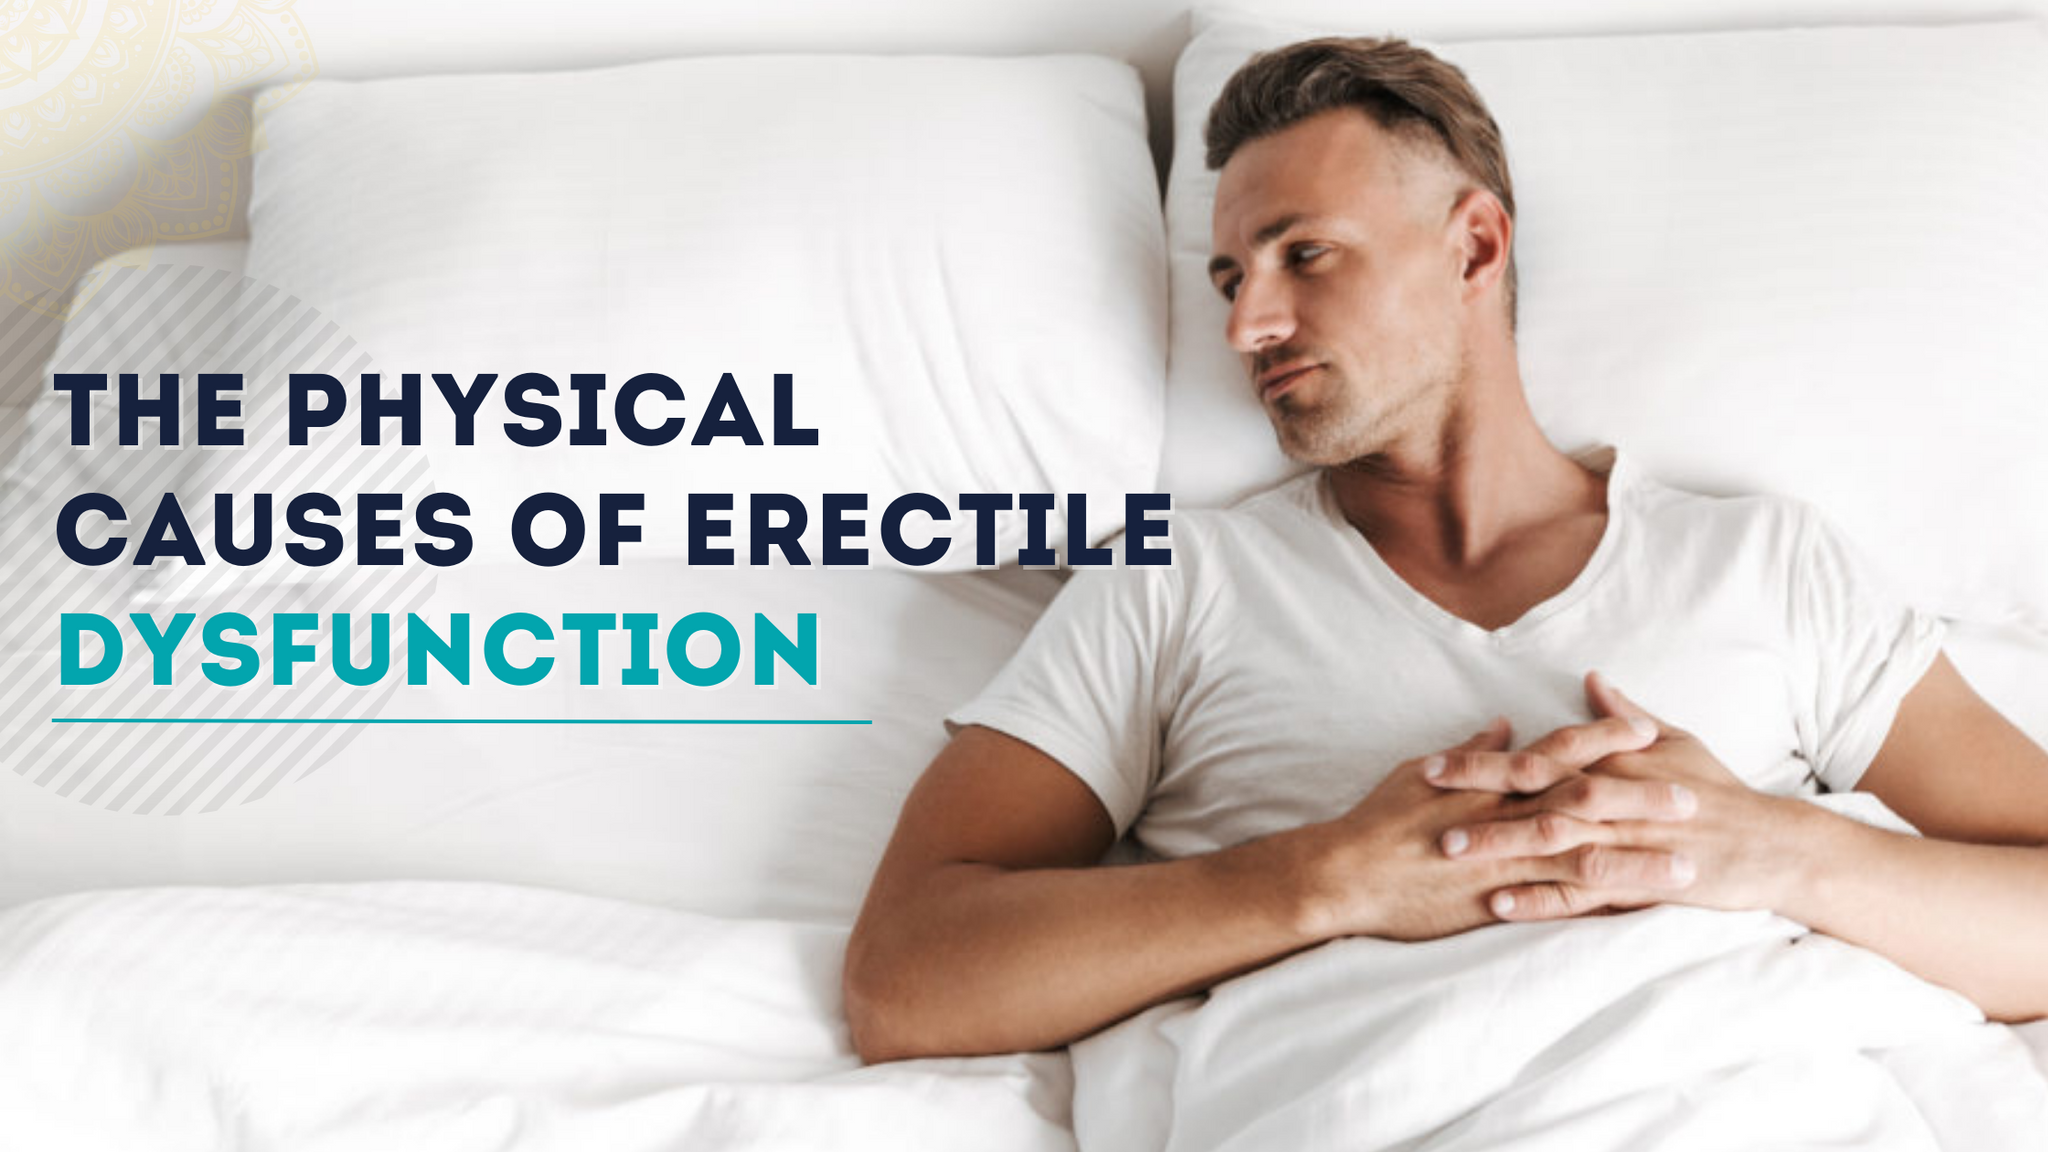 THE PHYSICAL CAUSES OF ERECTILE DYSFUNCTION